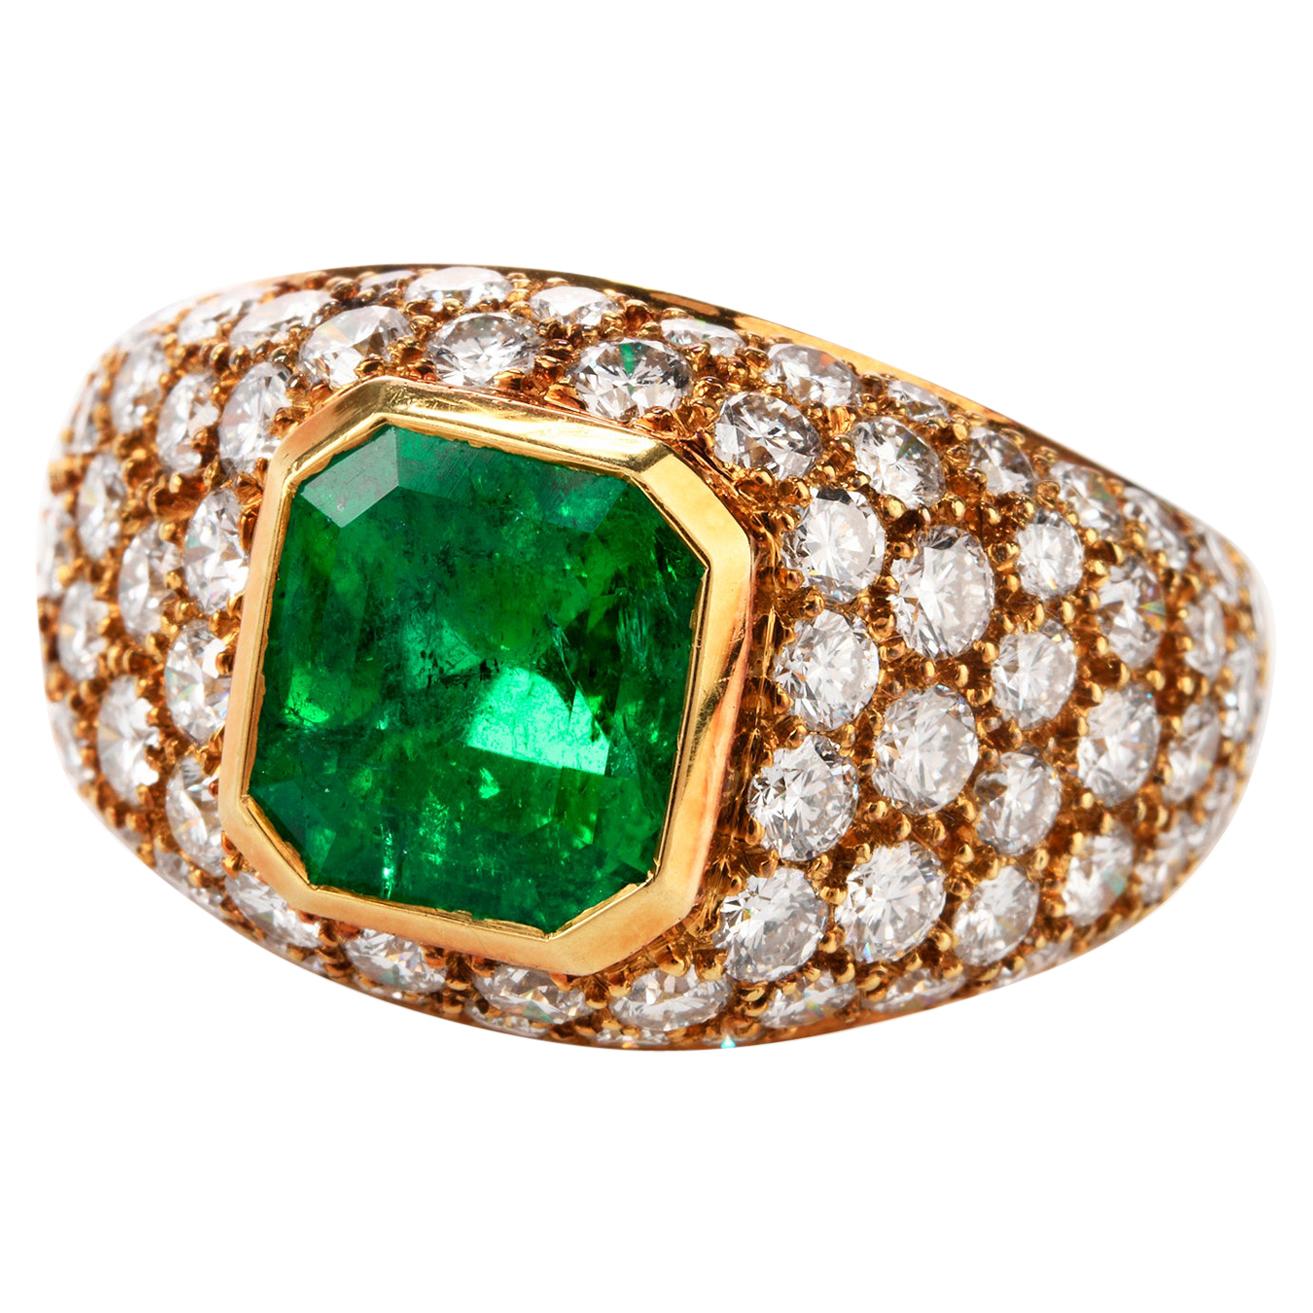 This alluring Tiffany and Co ring has many focal points of interest and was crafted in 18K Yellow Gold. Featuring an Asscher cut GIA certified Colombian Emerald in the center weighing approx. 2.18 carats,  this domed ring has pave set Diamonds